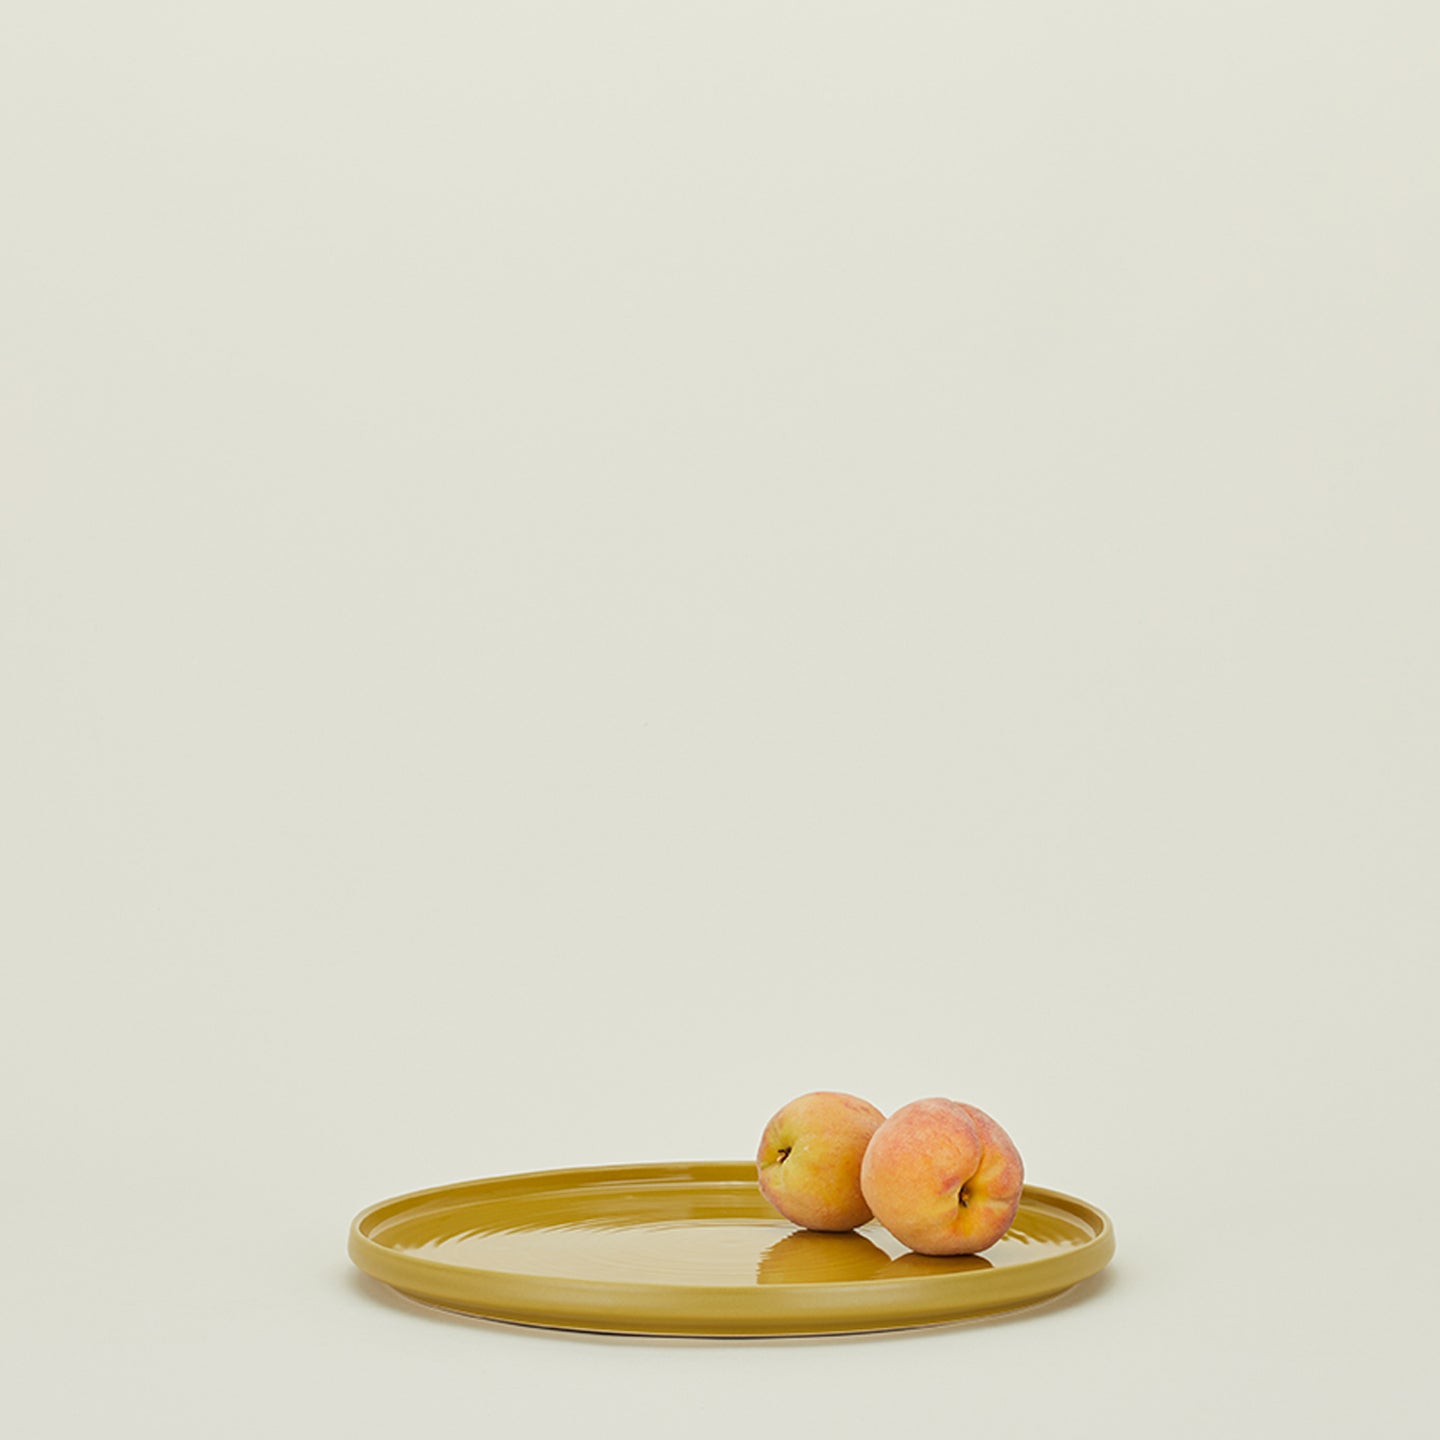 Minimalist composition featuring two ripe peaches on an olive plate.